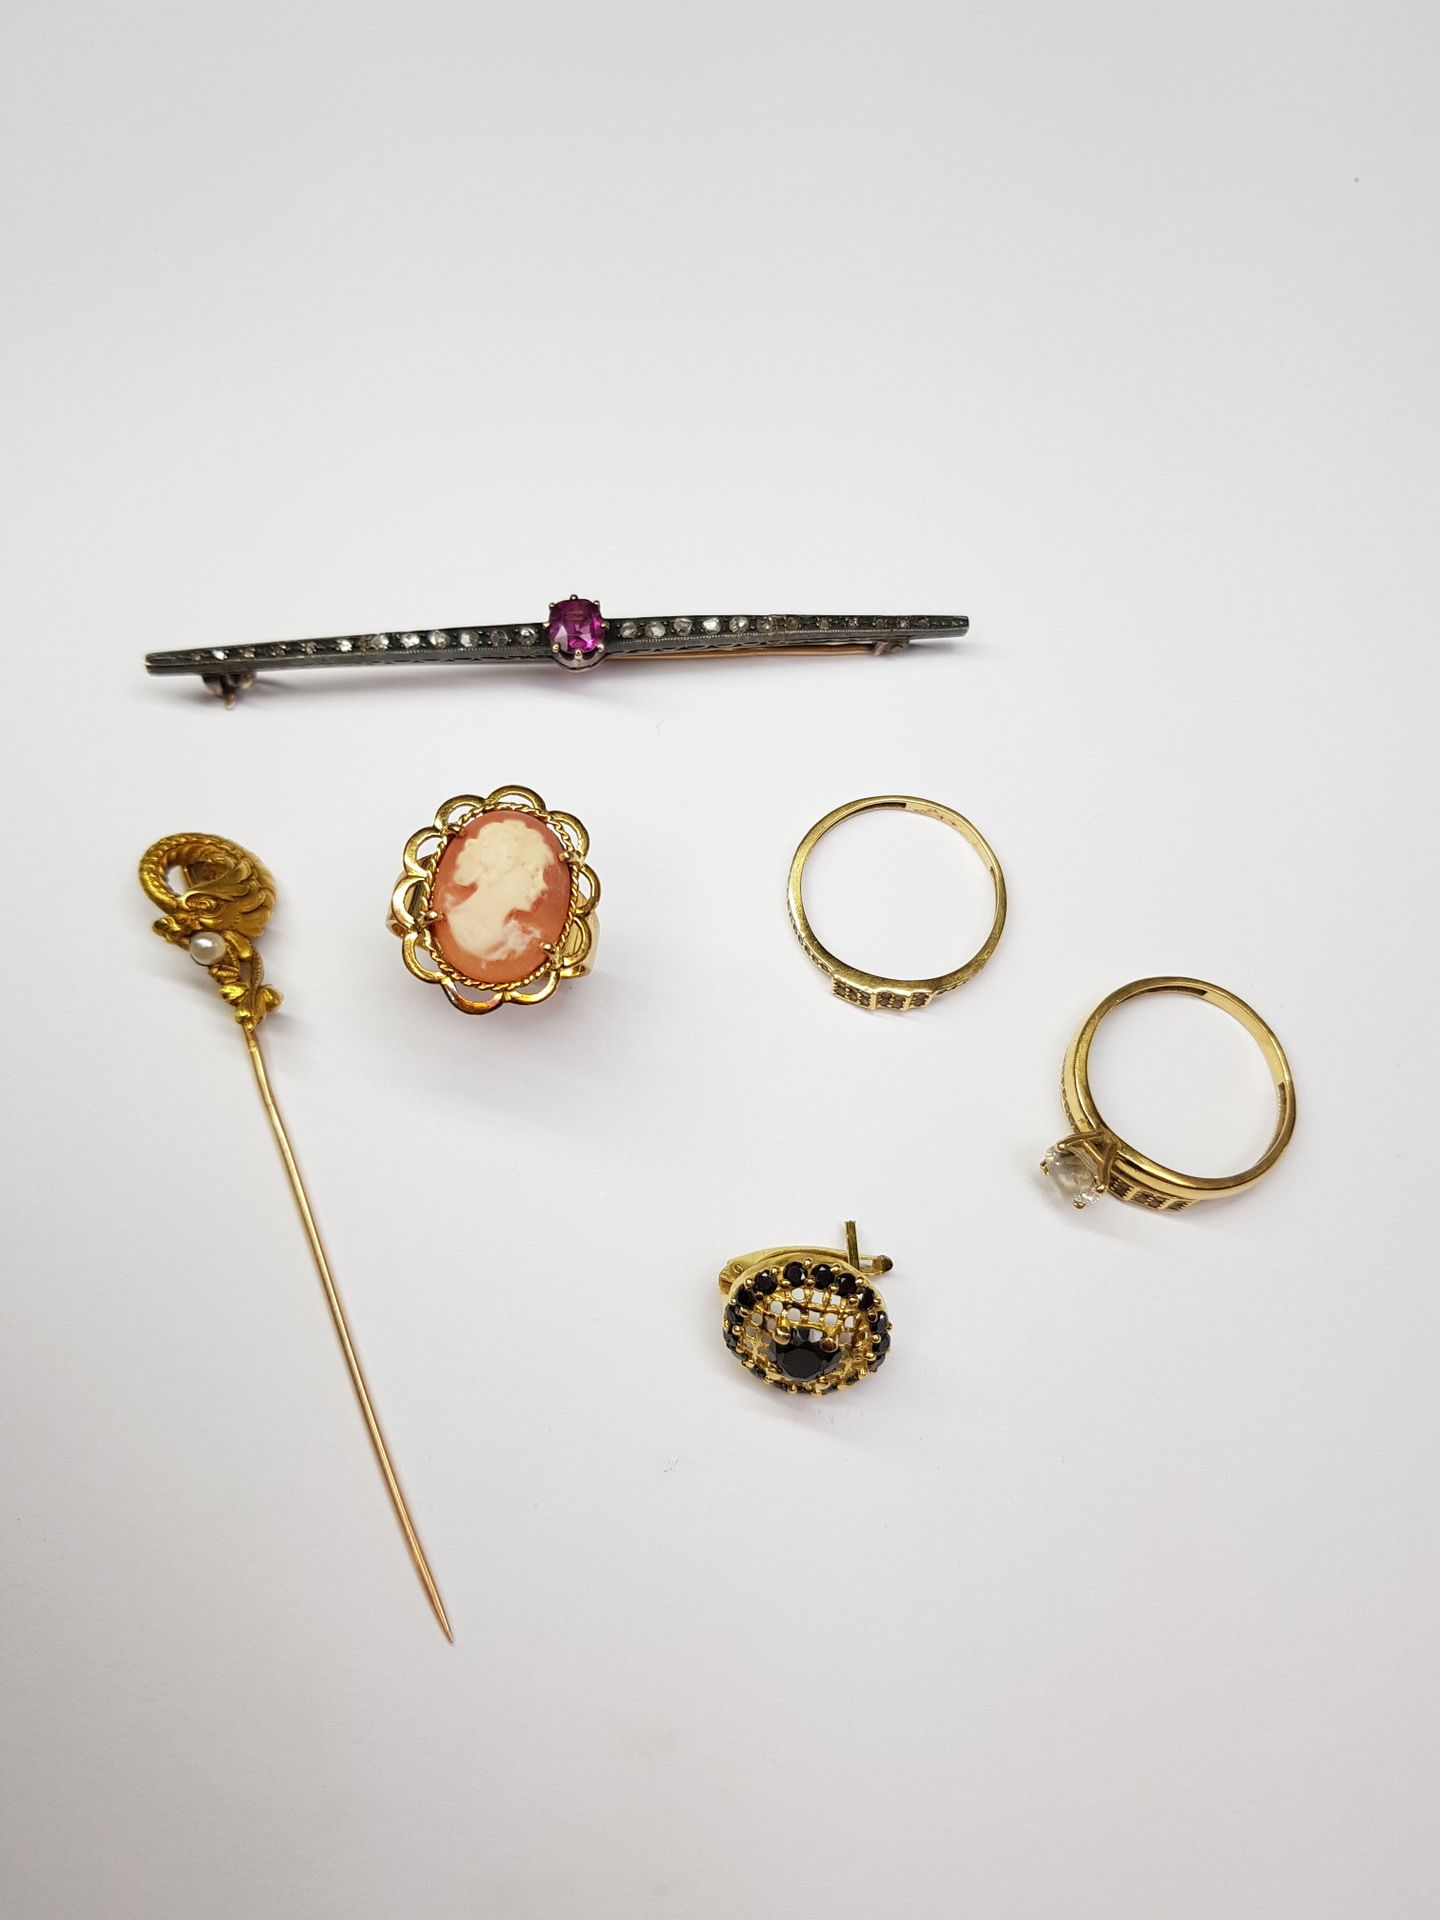 Null LOT of gold jewelry 750 ‰ including a cameo shell ring and a brooch adorned&hellip;